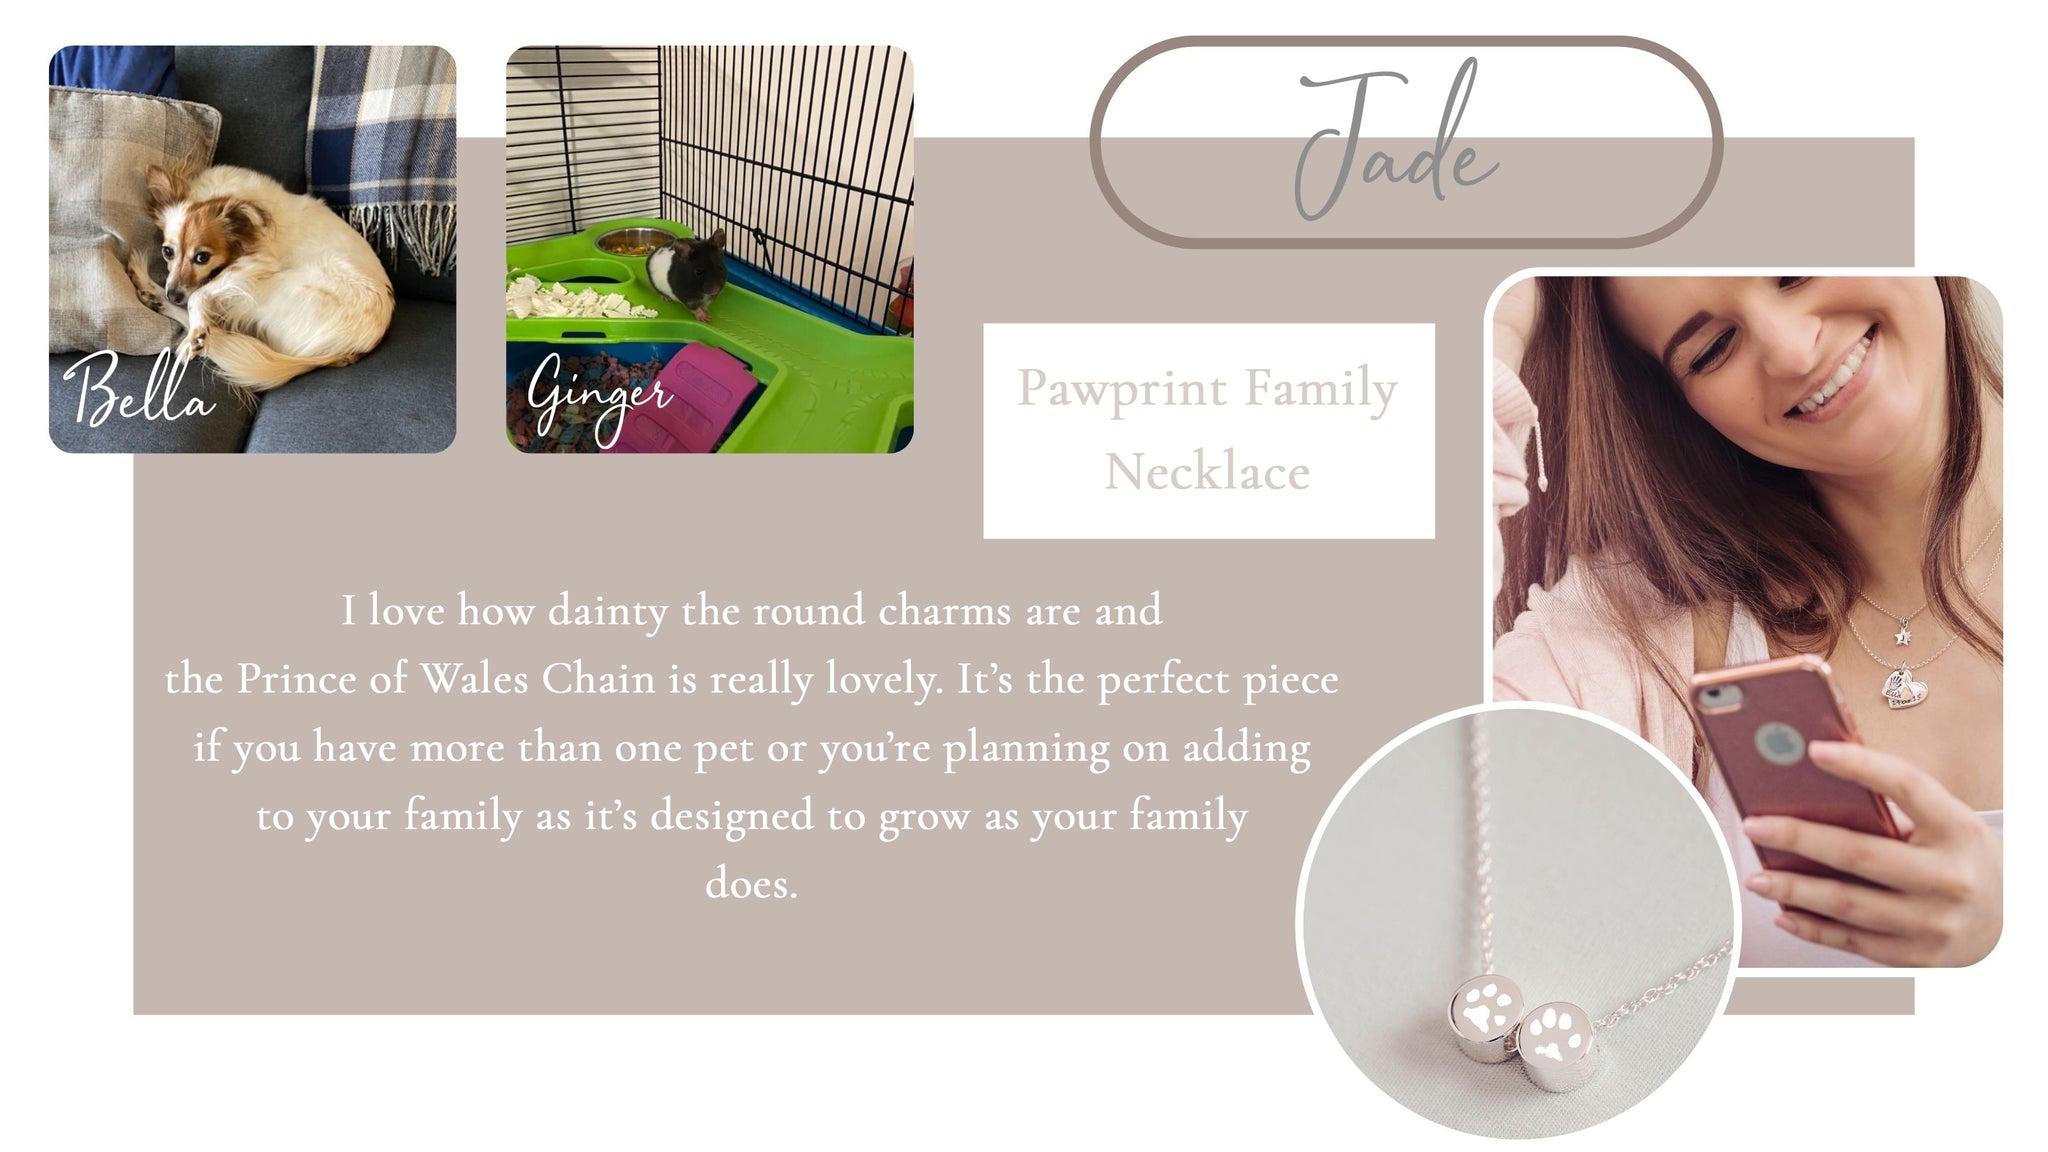 Pawprint Family Necklace